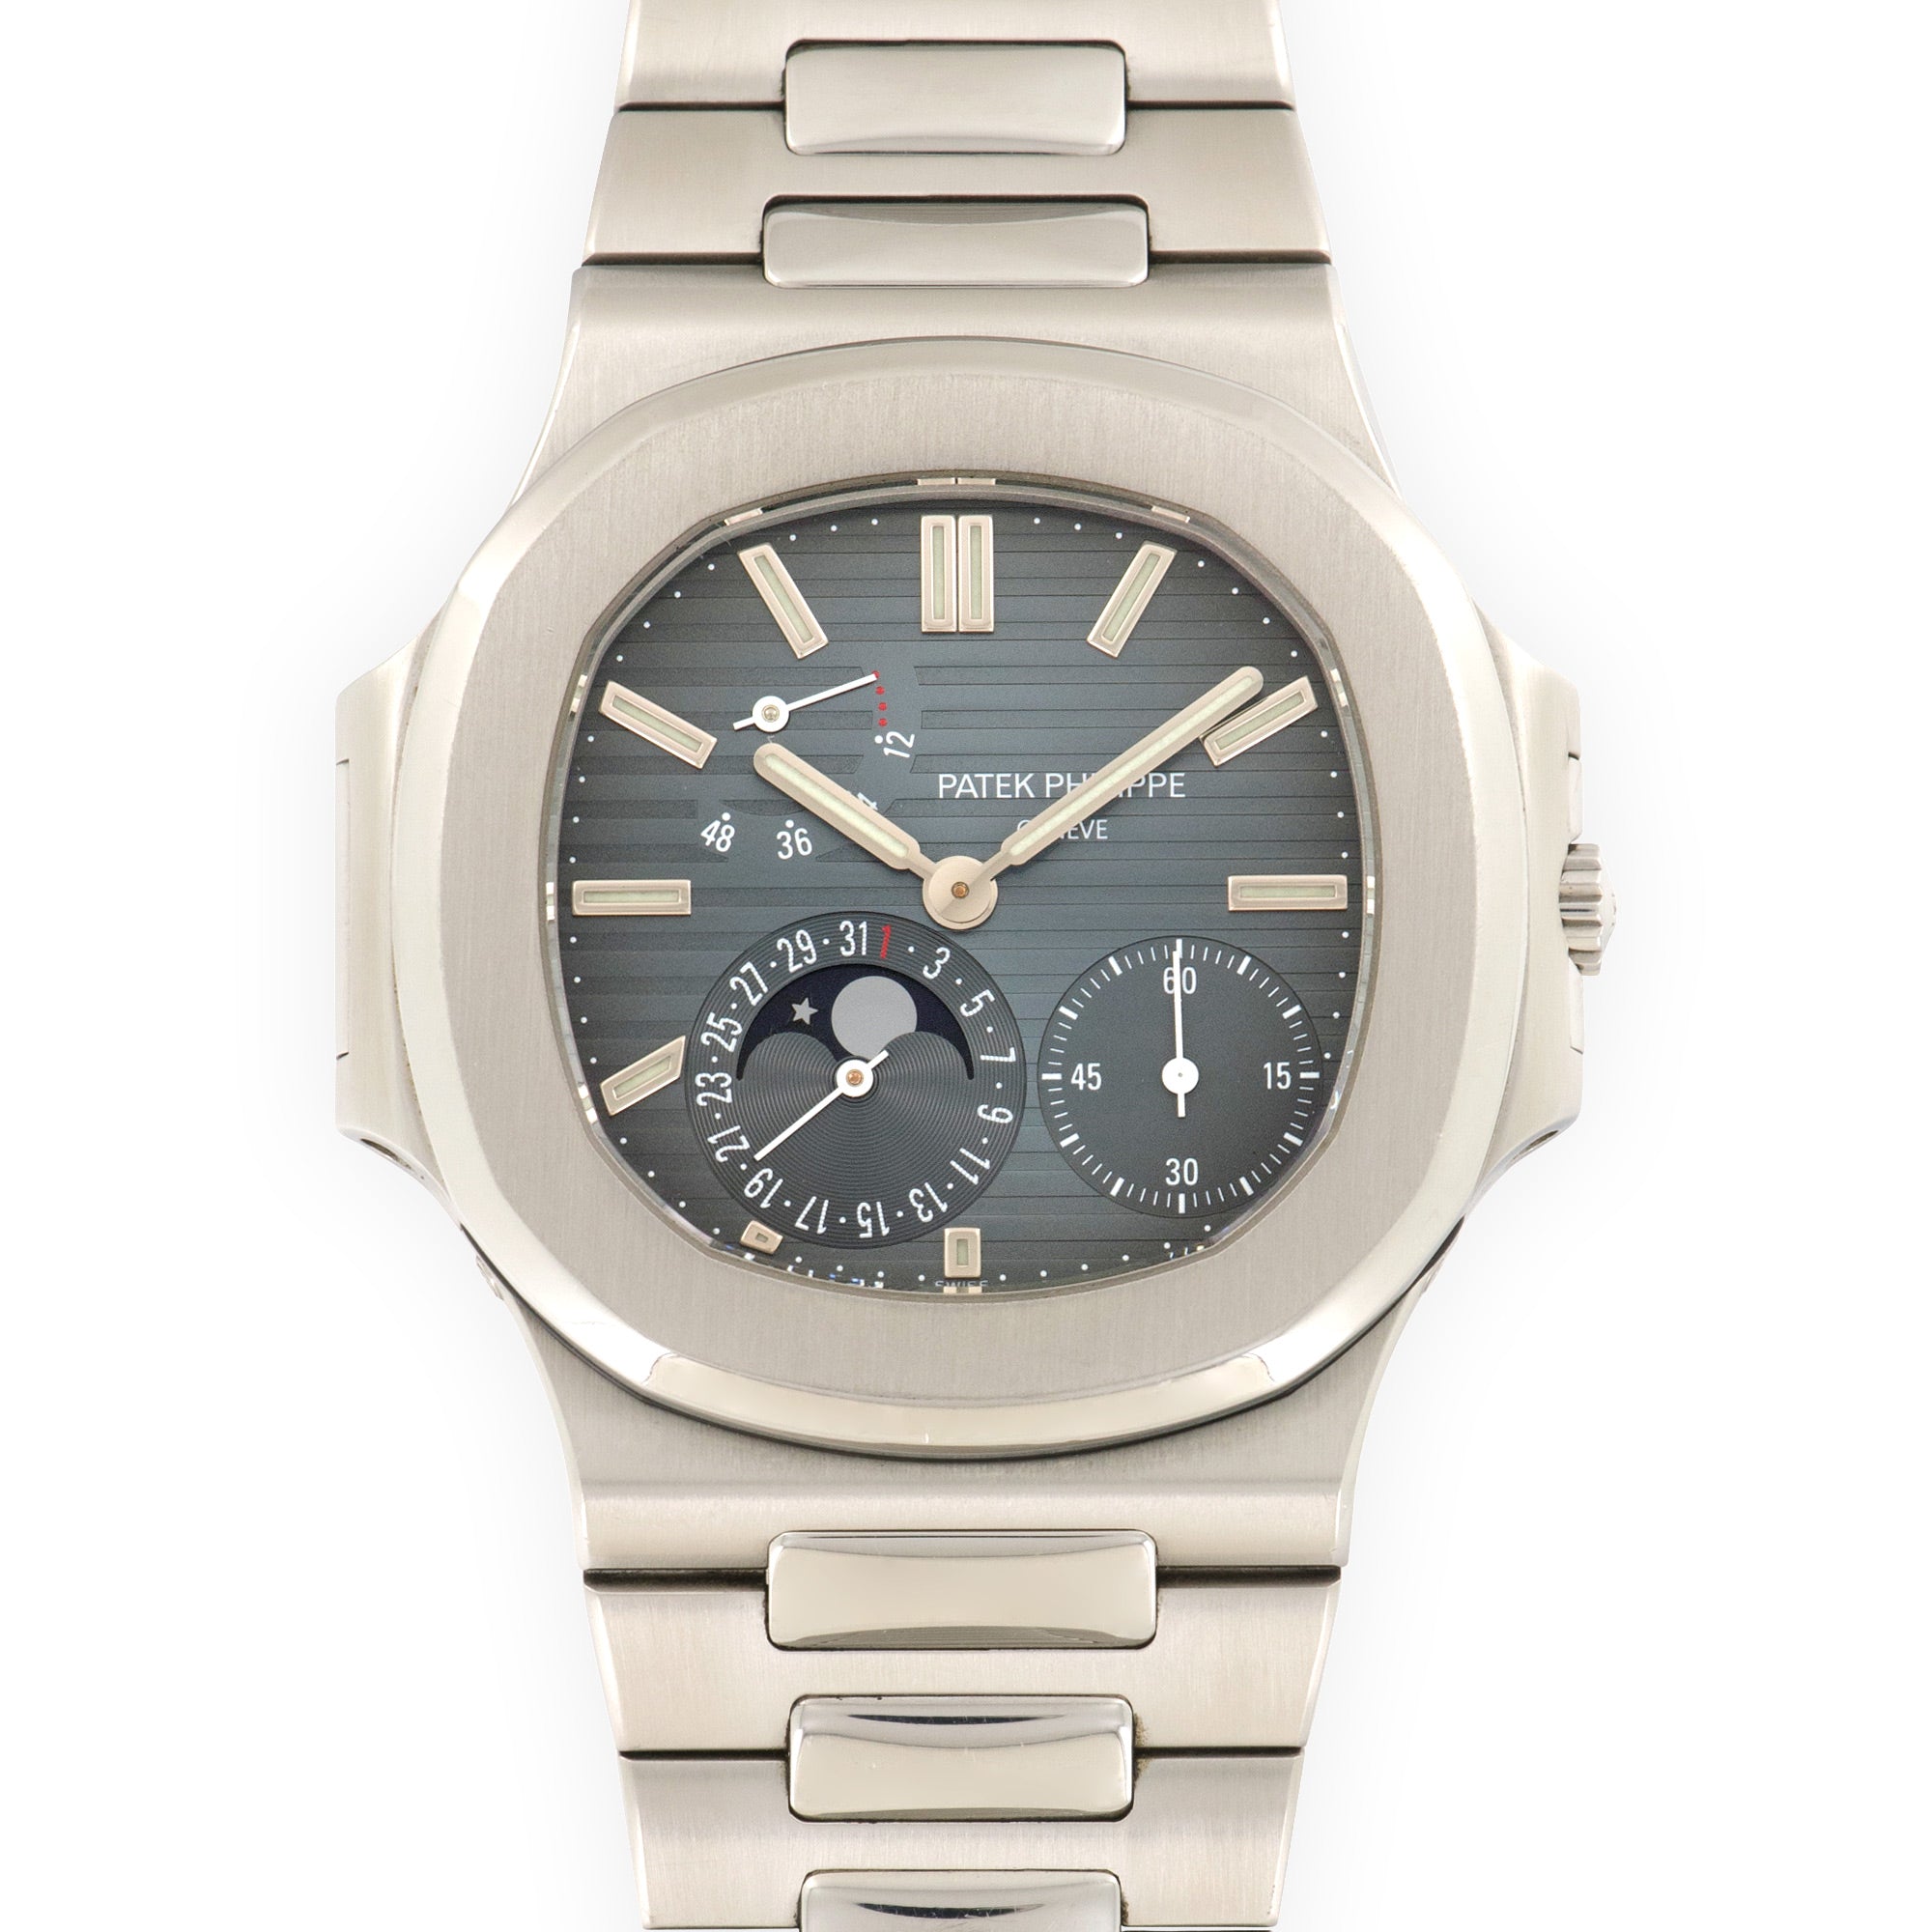 Patek Philippe - Patek Philippe Steel Nautilus Moonphase Watch Ref. 3712 with Original Box and Papers - The Keystone Watches